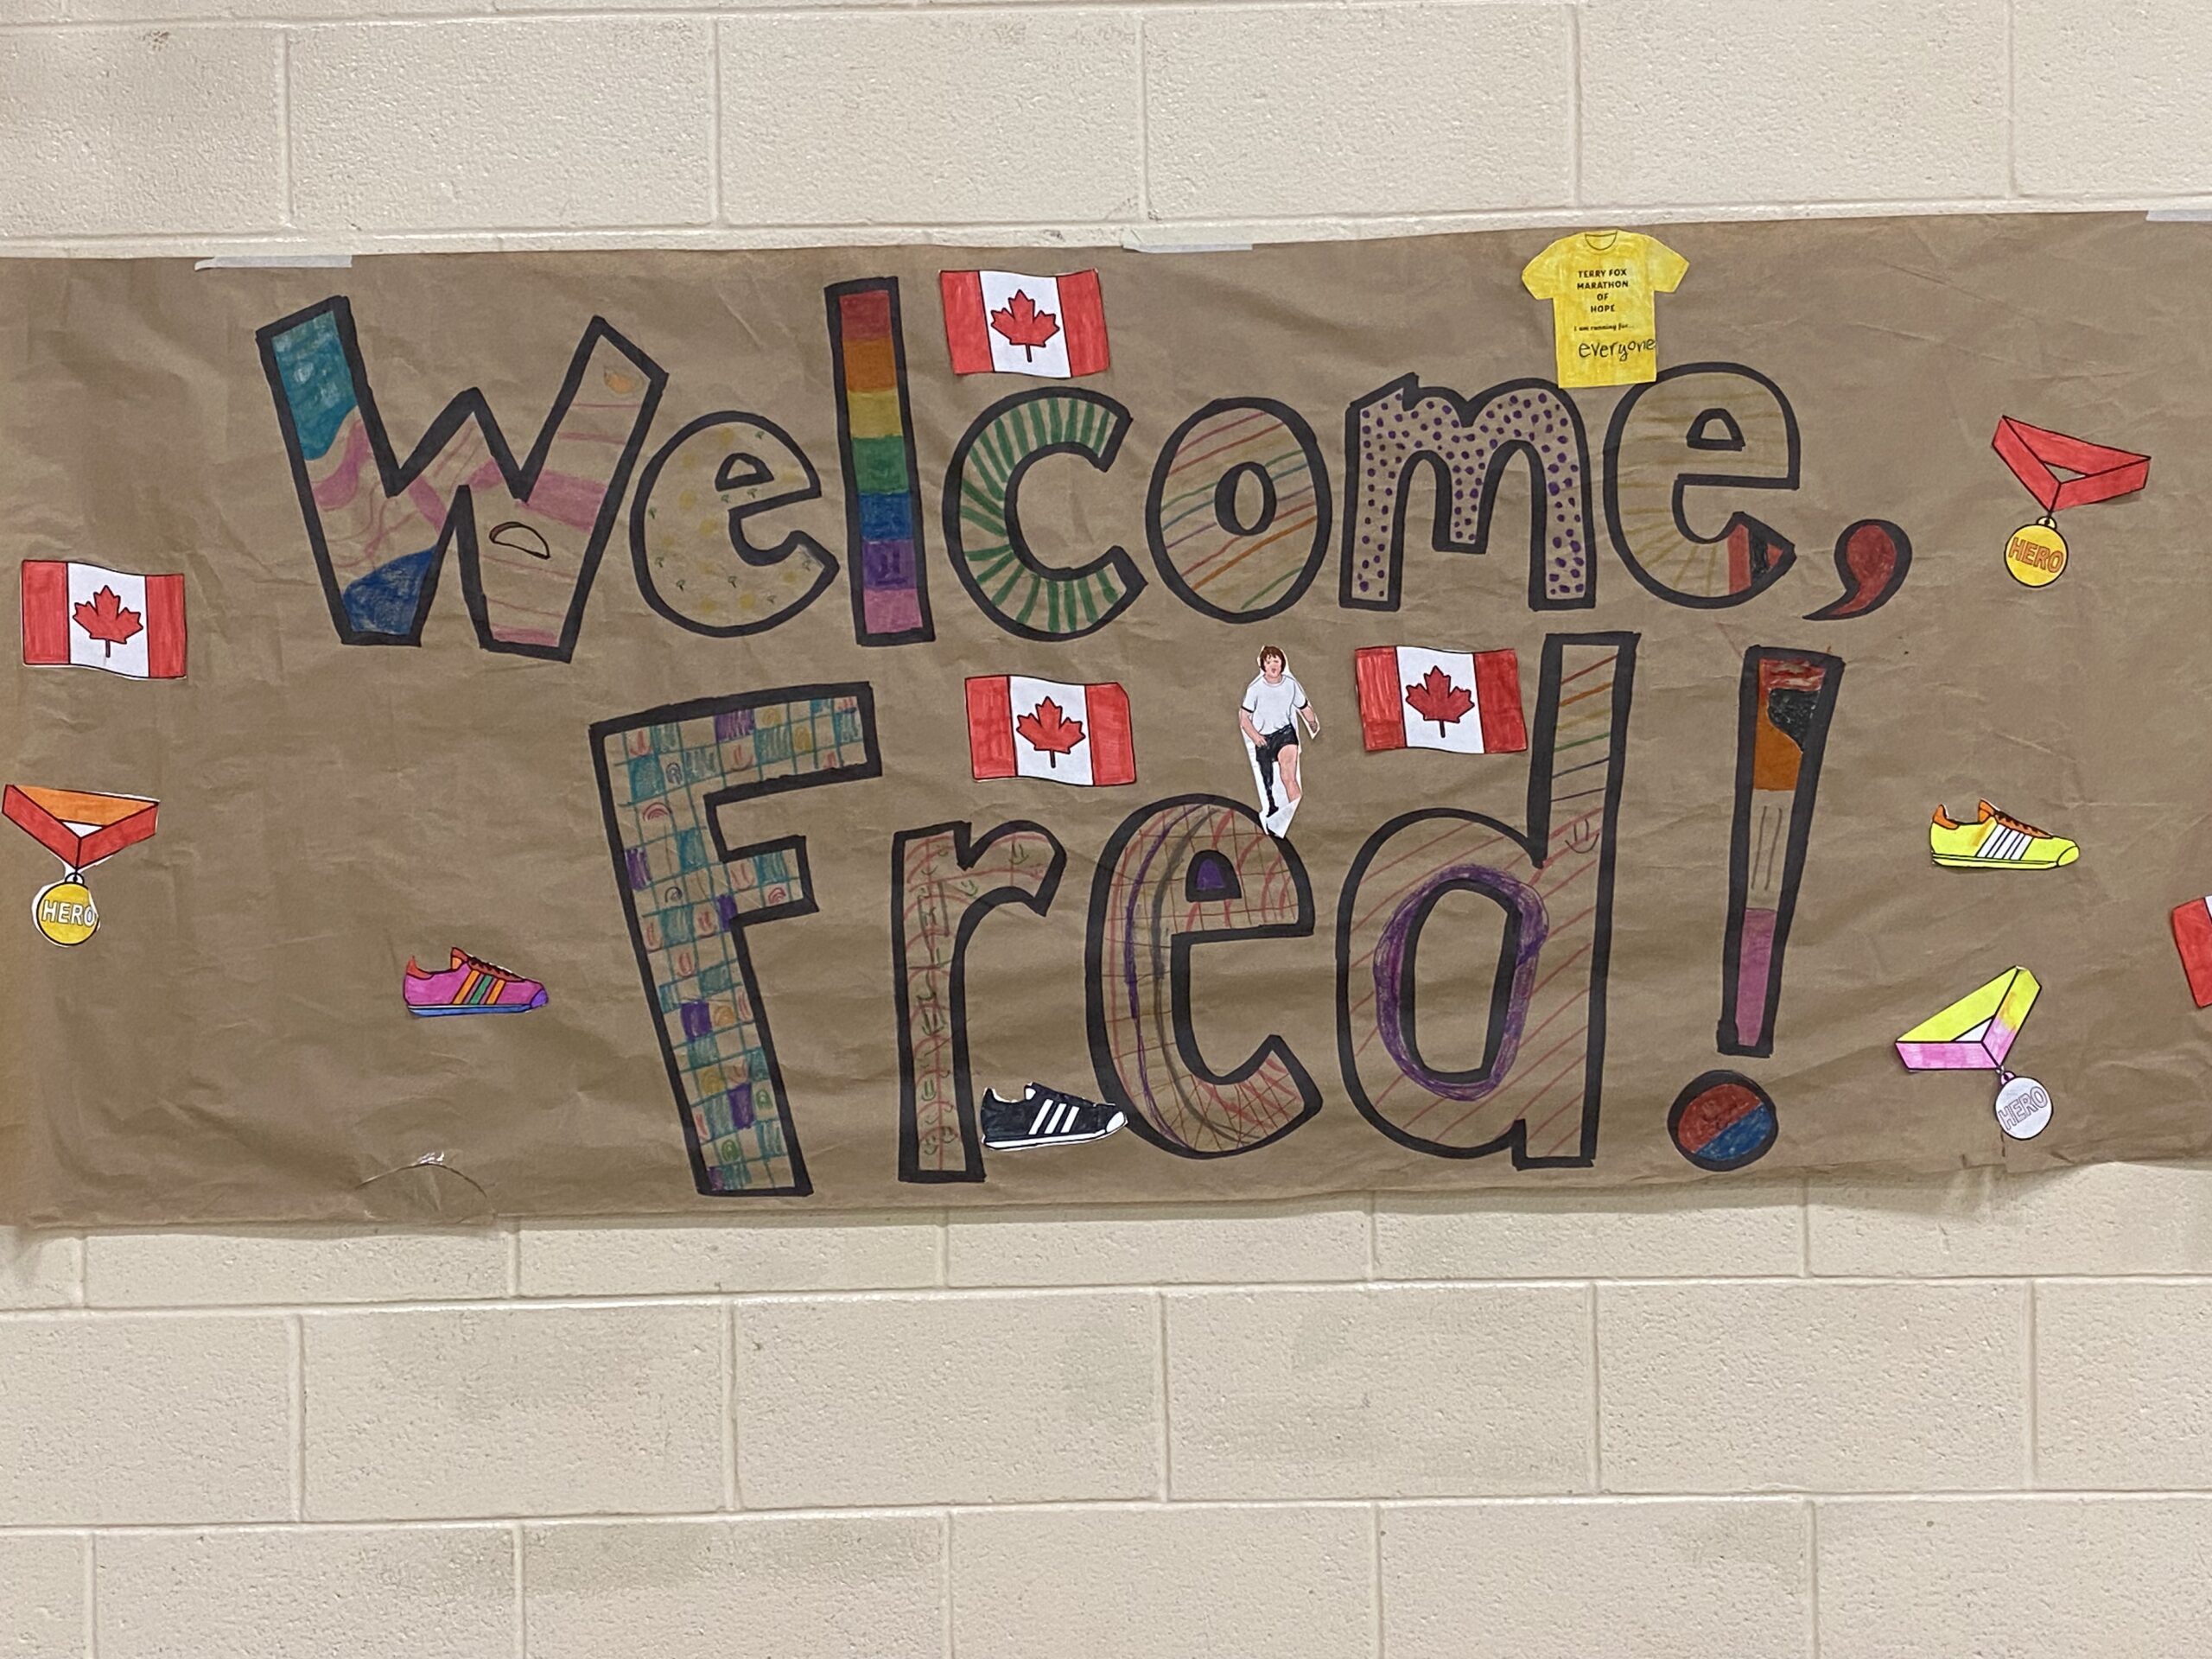 A large, handmade banner reads "Welcome Fred"